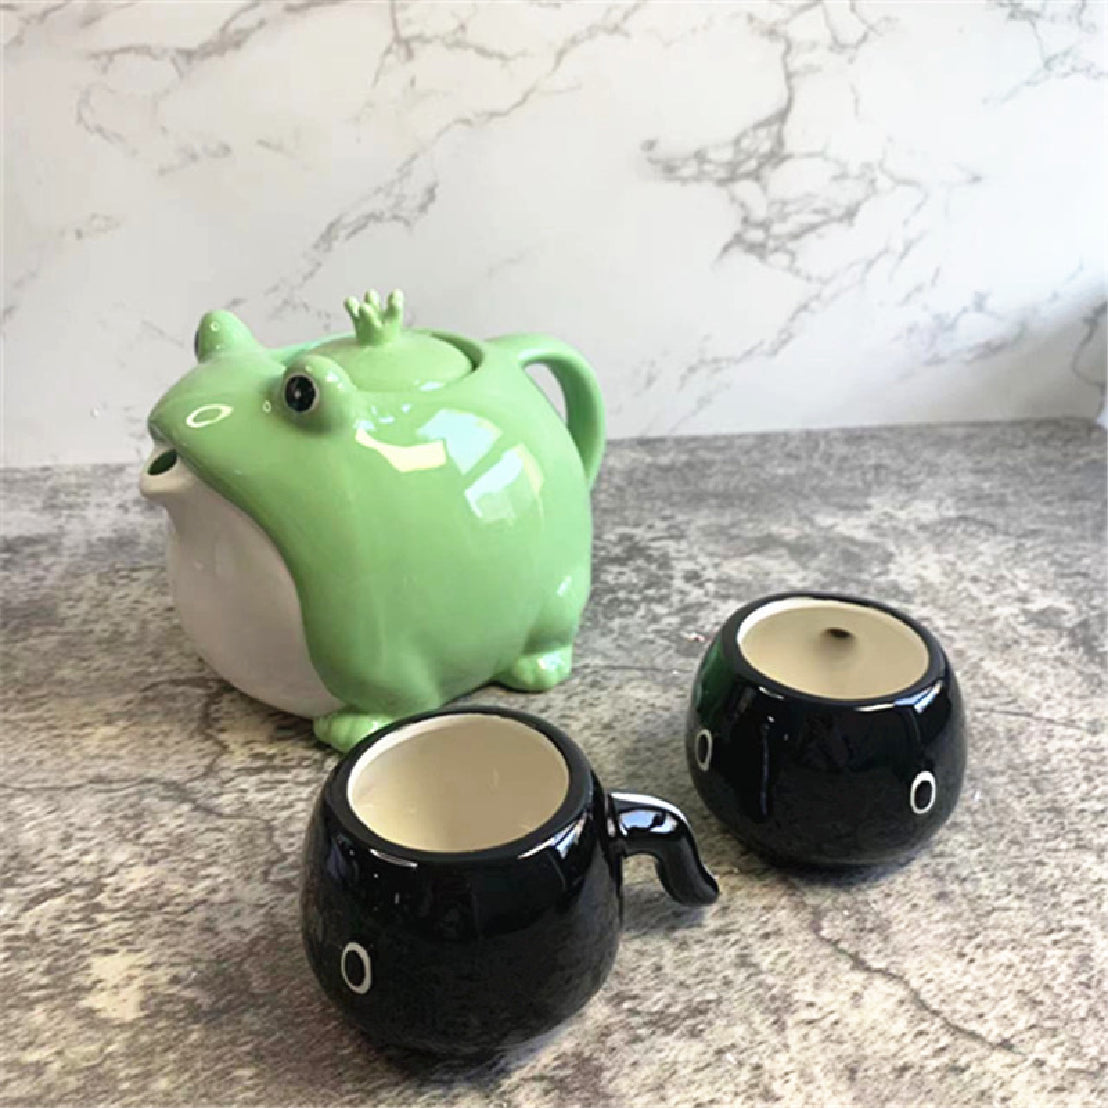 Ceramic Frog Tea Pot Set, Set of 3 (1 Teapot 2 Cups), Cute and Creative Tea Service, Ideal for Office and Home Use, Kitchen Living Room Home Decor